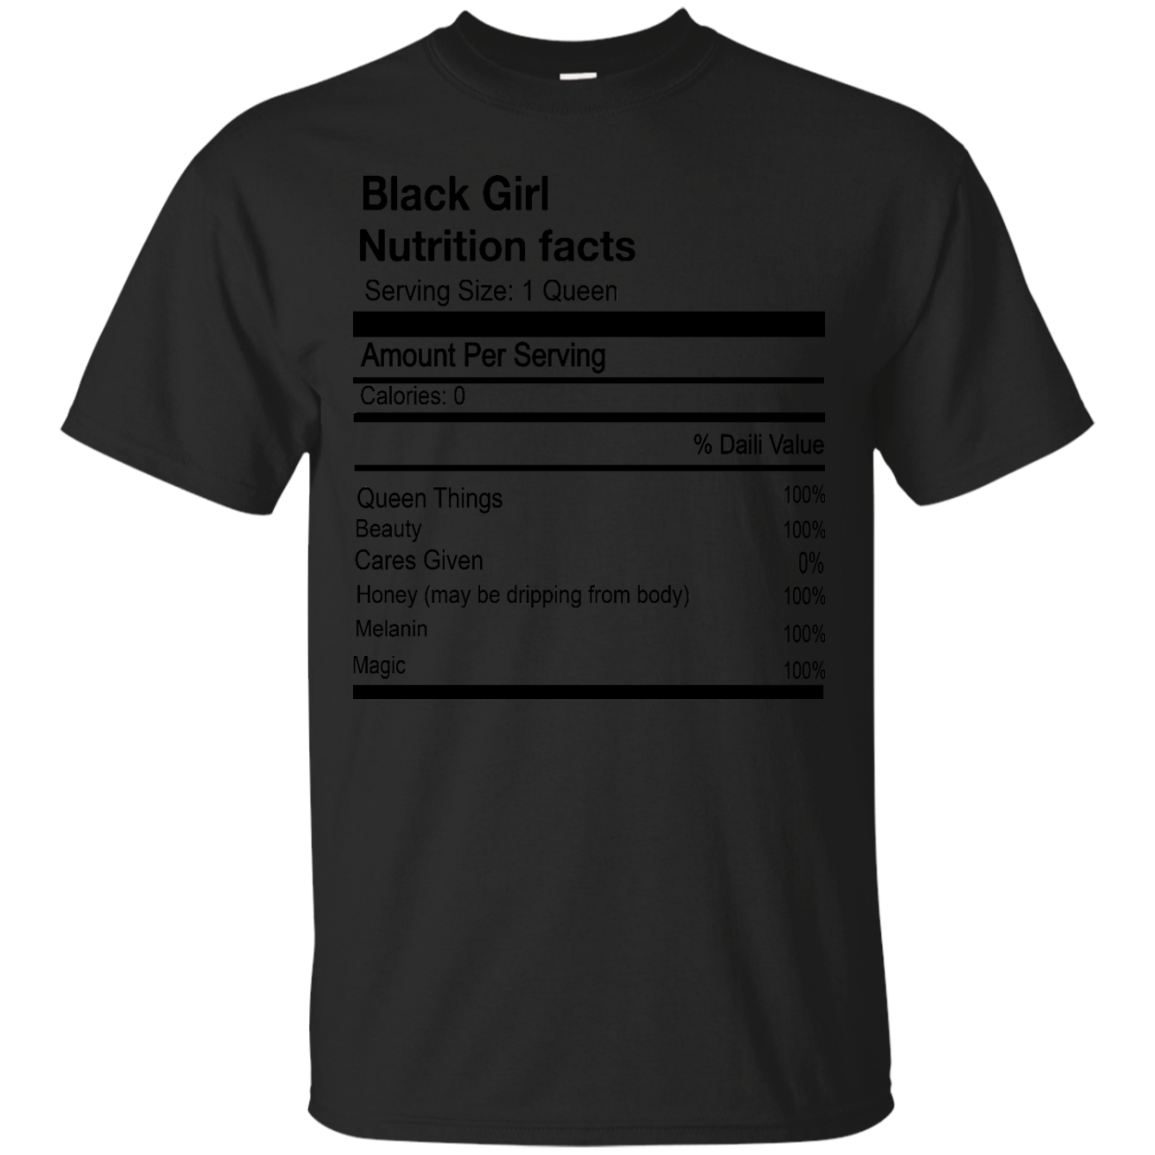 Black Girl Shirts Black Girl Nutrition Facts Serving Size 1 Queen - Amyna